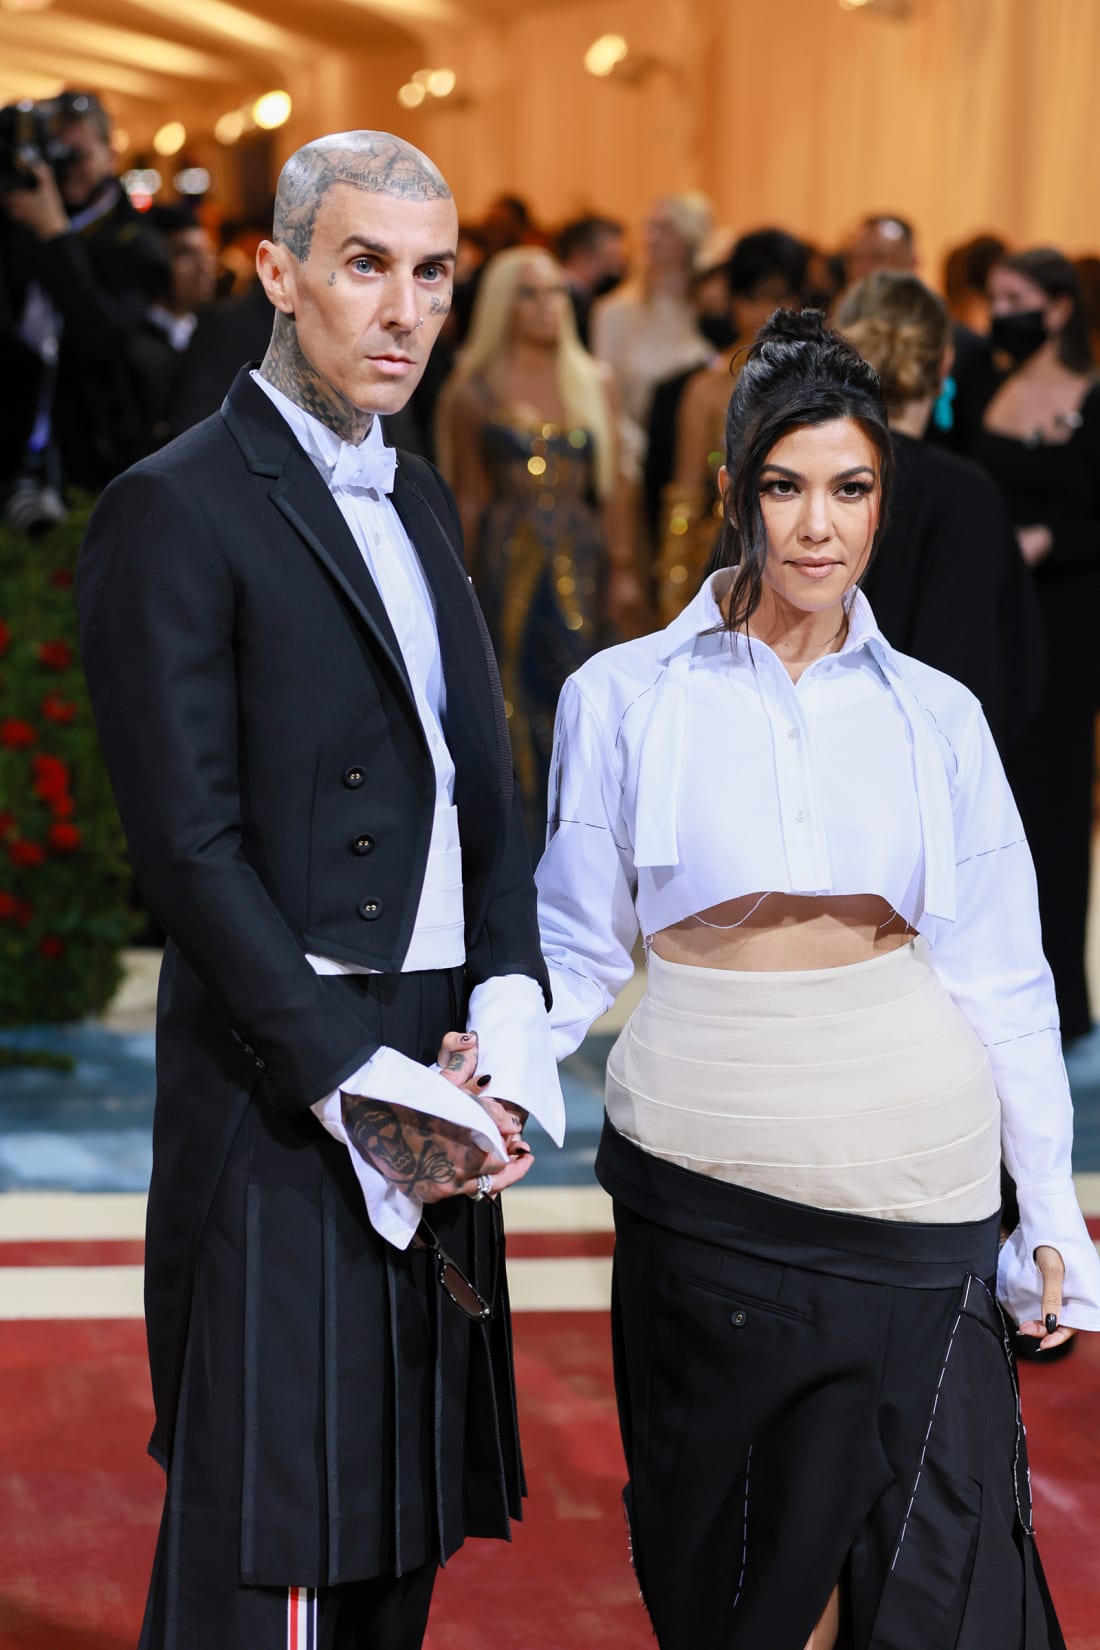 Travis Barker and Kourtney Kardashian wore complementary Thom Browne looks to the Met Gala, with the designer explaining Kardashian's look was a "deconstructed interpretation" of Barker's tailcoat, kilt and cumberbund.